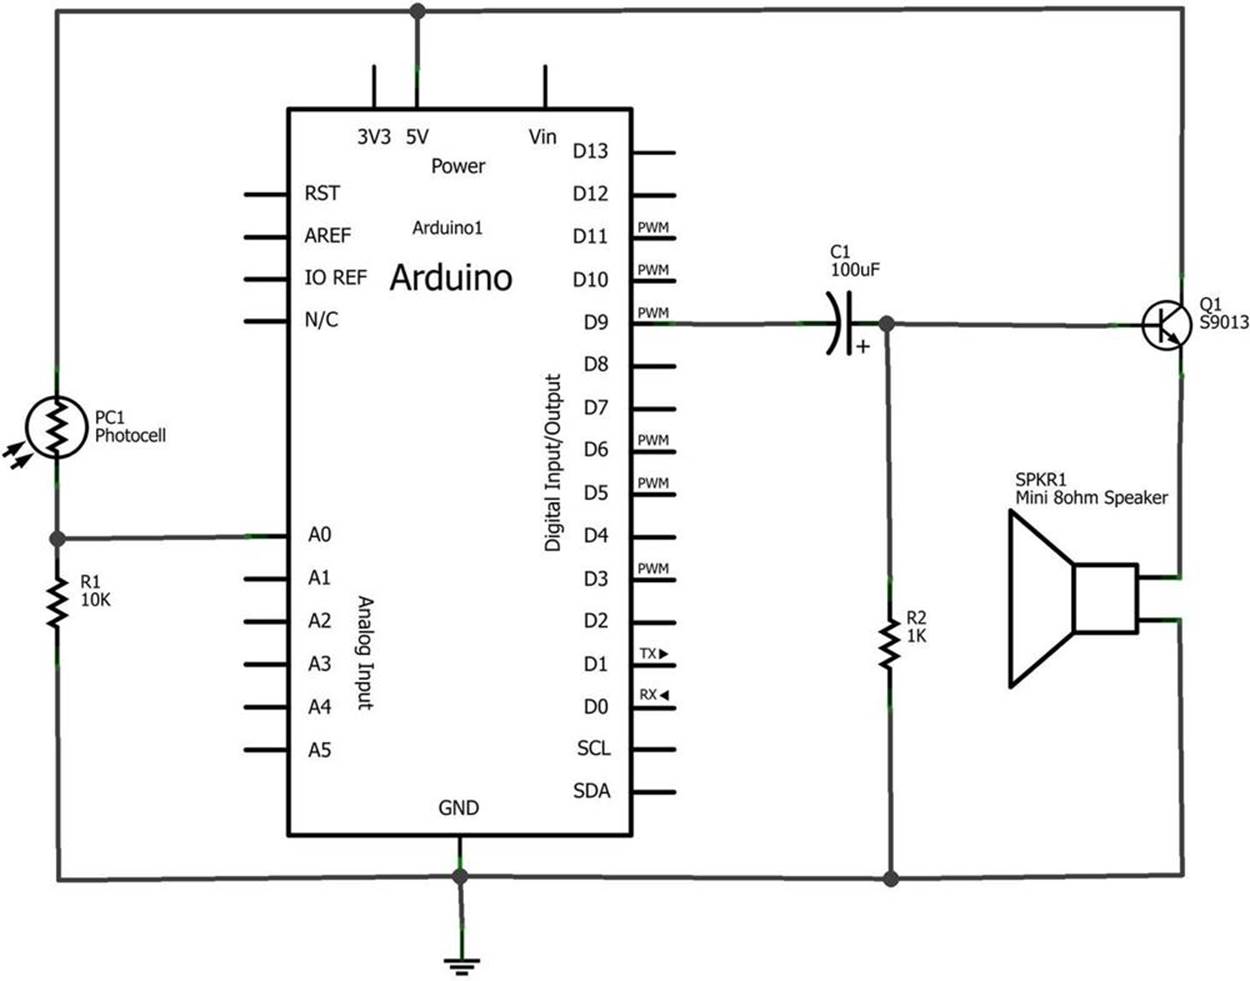 The Theremin circuit schematic diagram